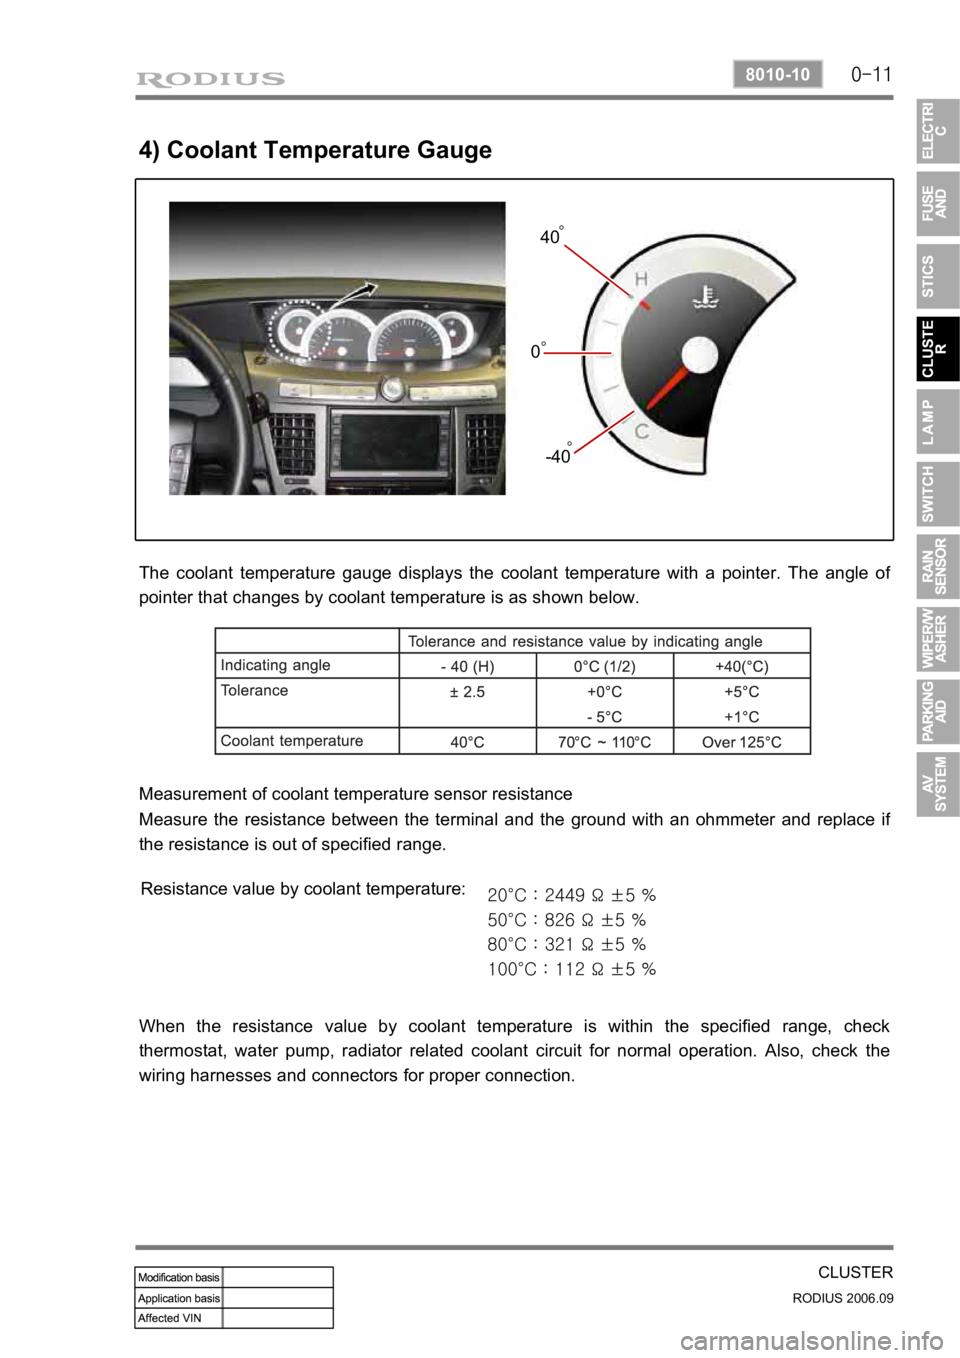 SSANGYONG RODIUS 2007  Service Manual 0-11
CLUSTER
RODIUS 2006.09
8010-10
4) Coolant Temperature Gauge
The coolant temperature gauge displays the coolant temperature with a pointer. The angle of 
pointer that changes by coolant temperatur